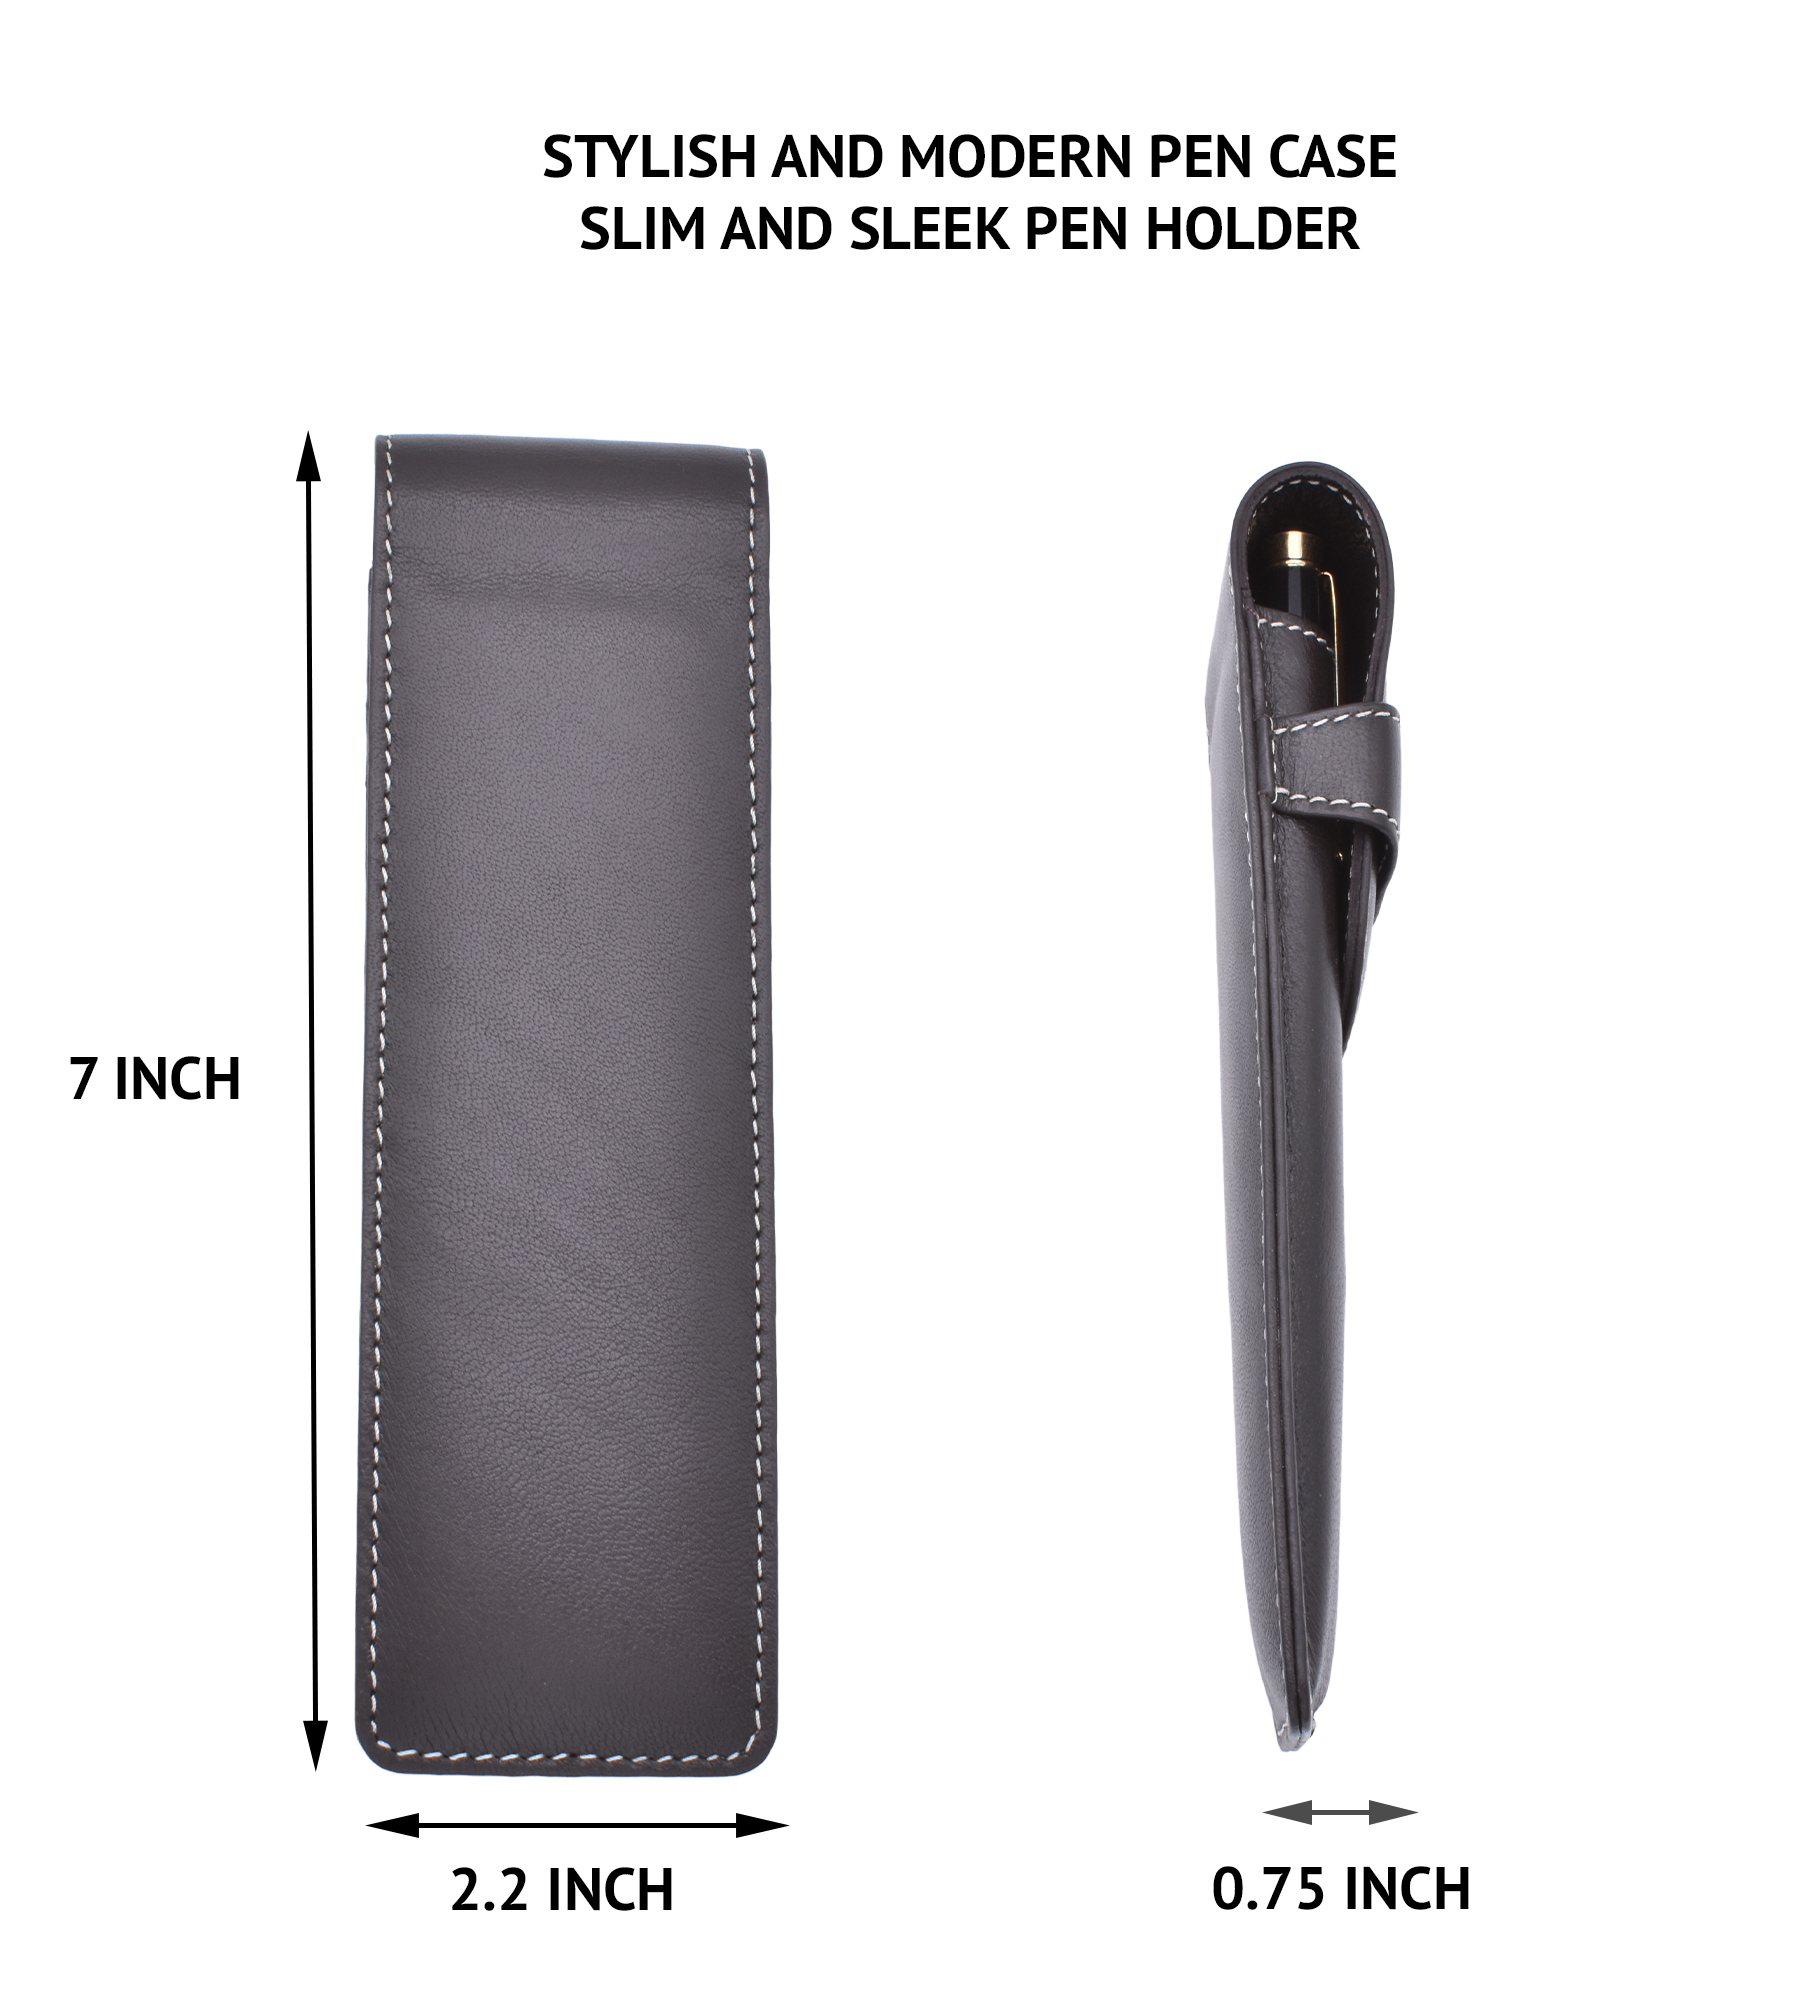 W51--Pen case to carry 2 pens in Genuine Leather - Brown